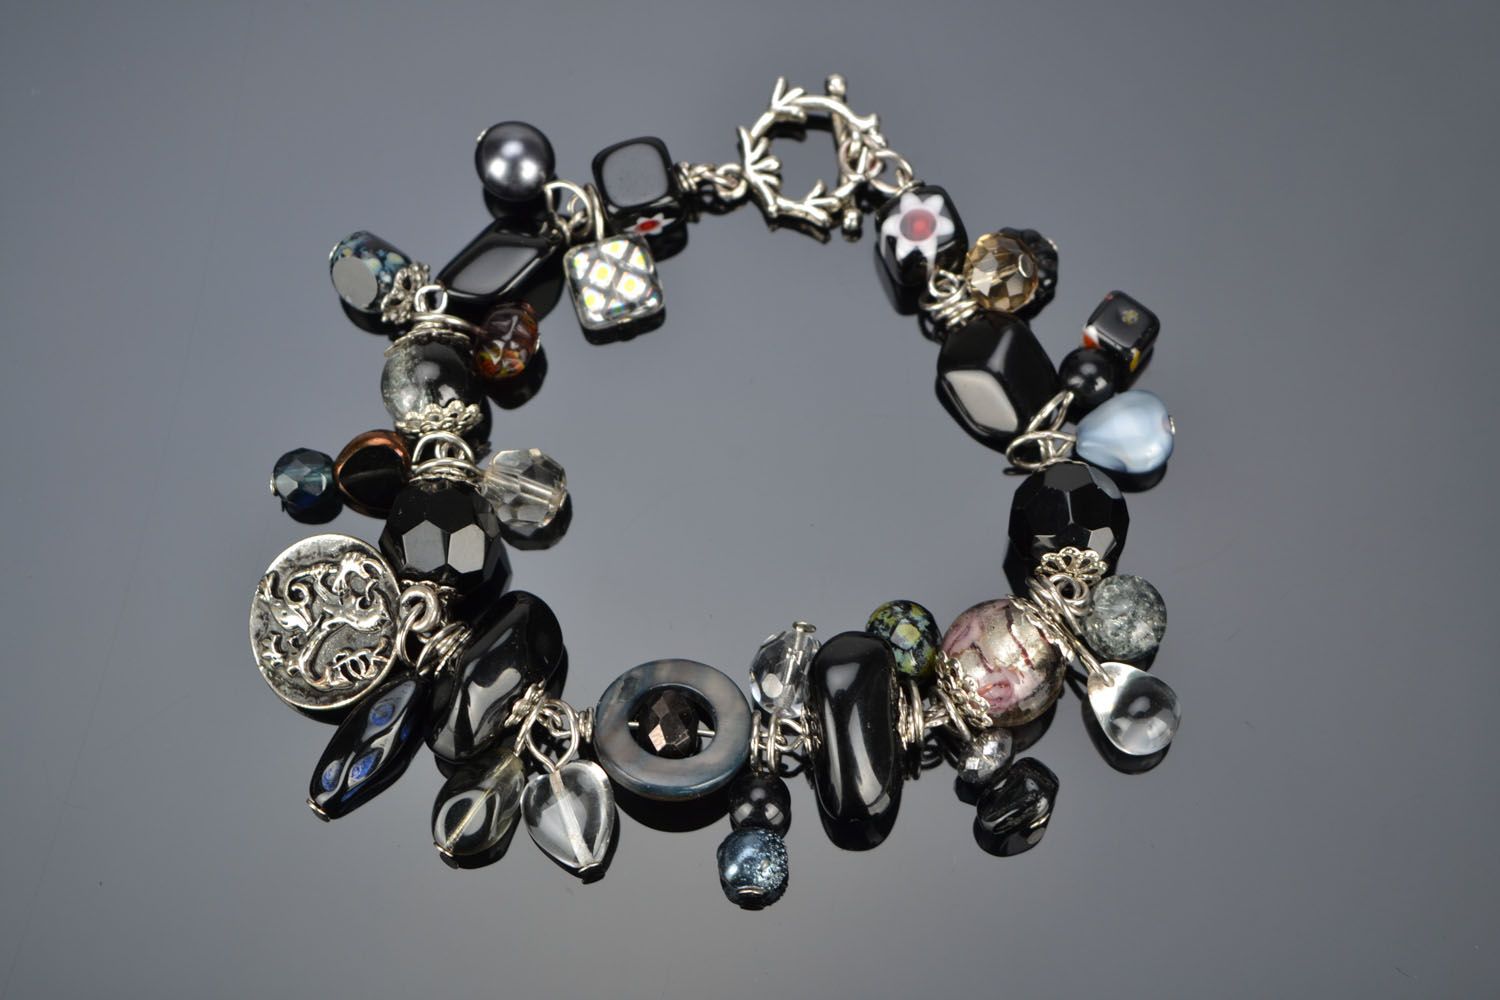 Bracelet with glass charms made using lampwork technique photo 2